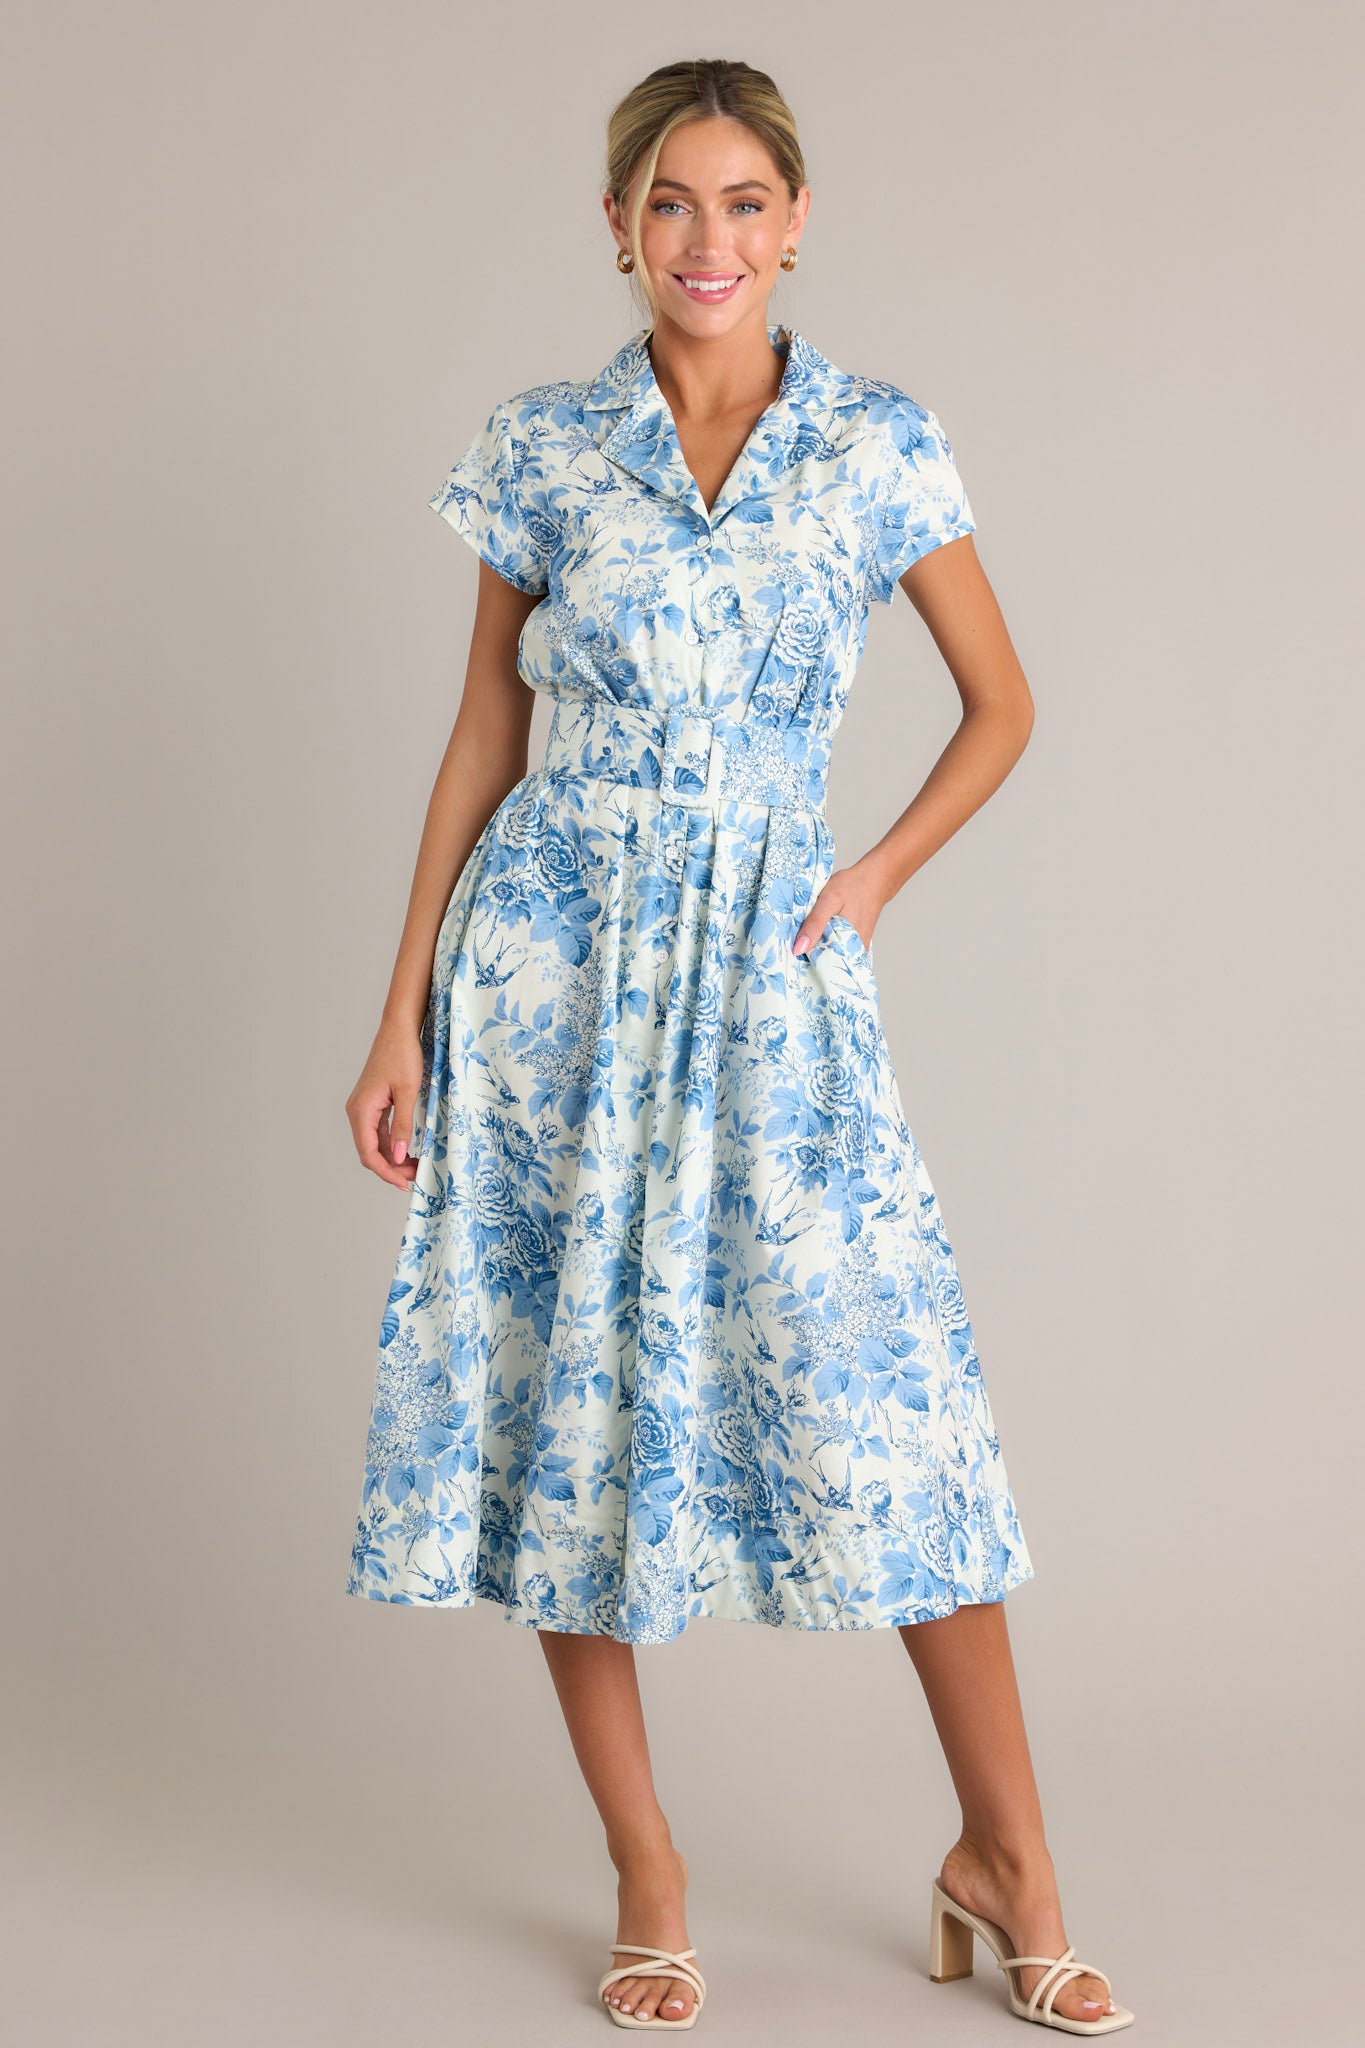 This dress features a notched lapel collared v-neckline, a full button front, belt loops, a functional belt, functional hip pockets, and a front slit.